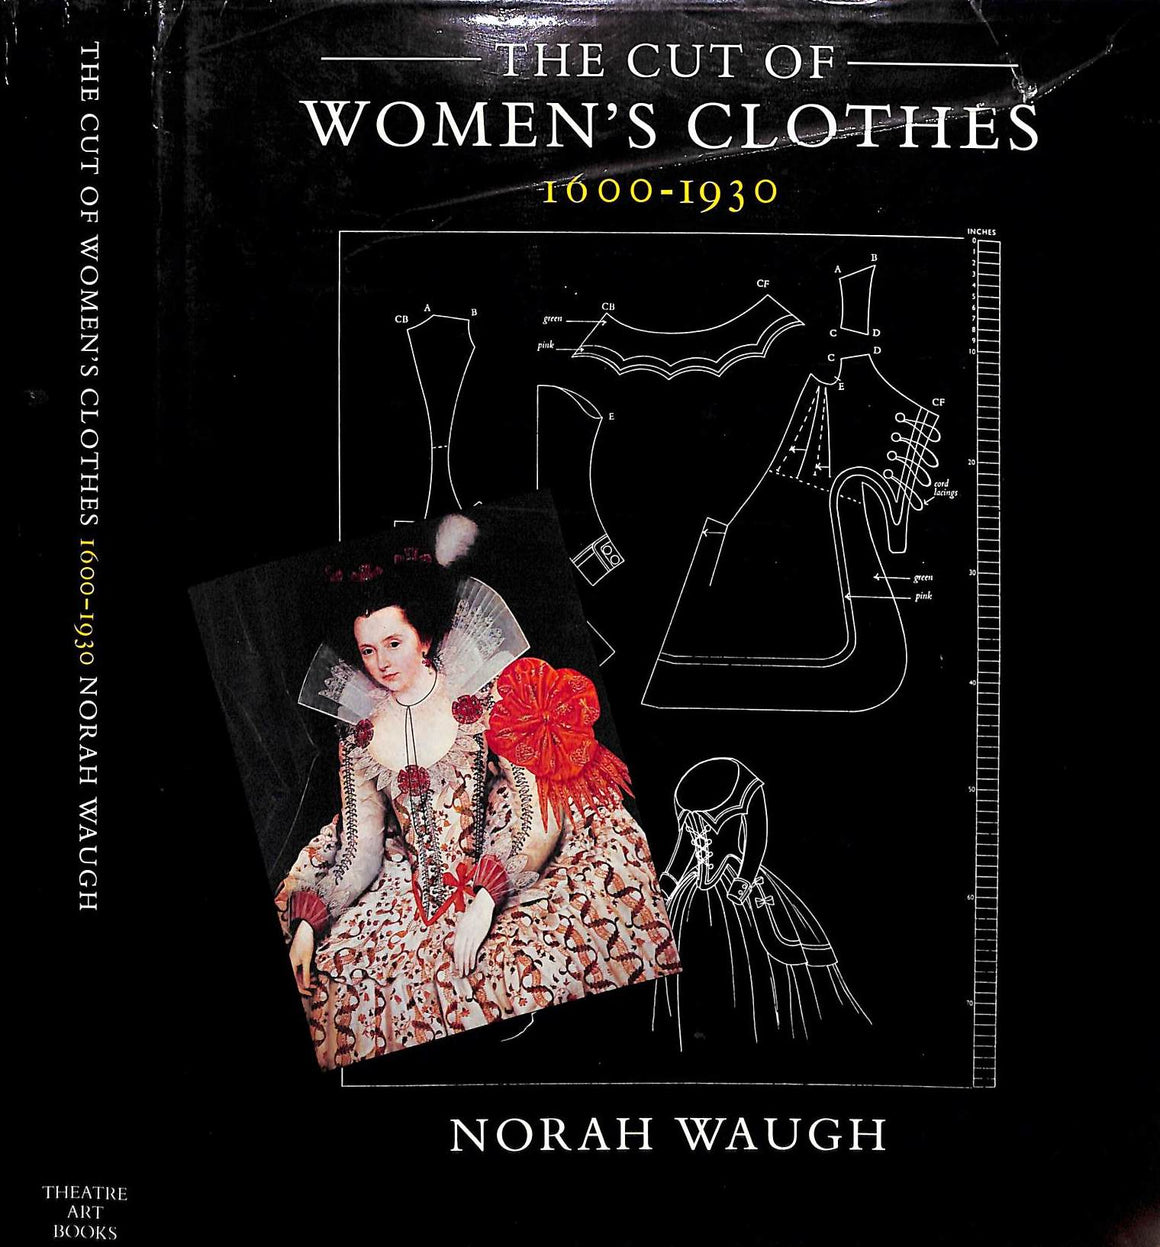 "The Cut Of Women's Clothes 1600-1930" WAUGH, Norah